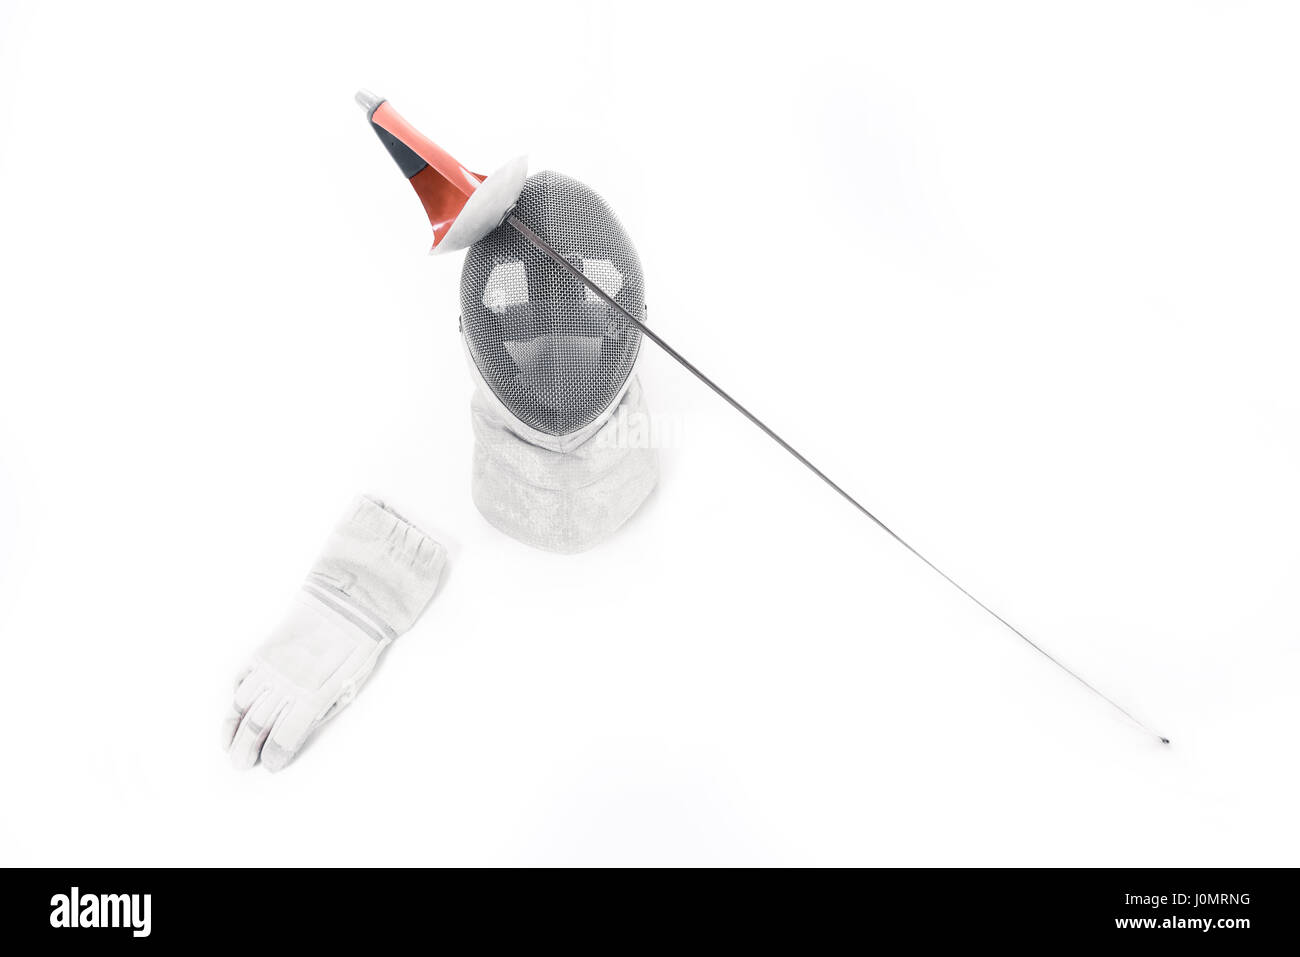 Professional fencing equipment, mask, glove and rapier isolated on white Stock Photo